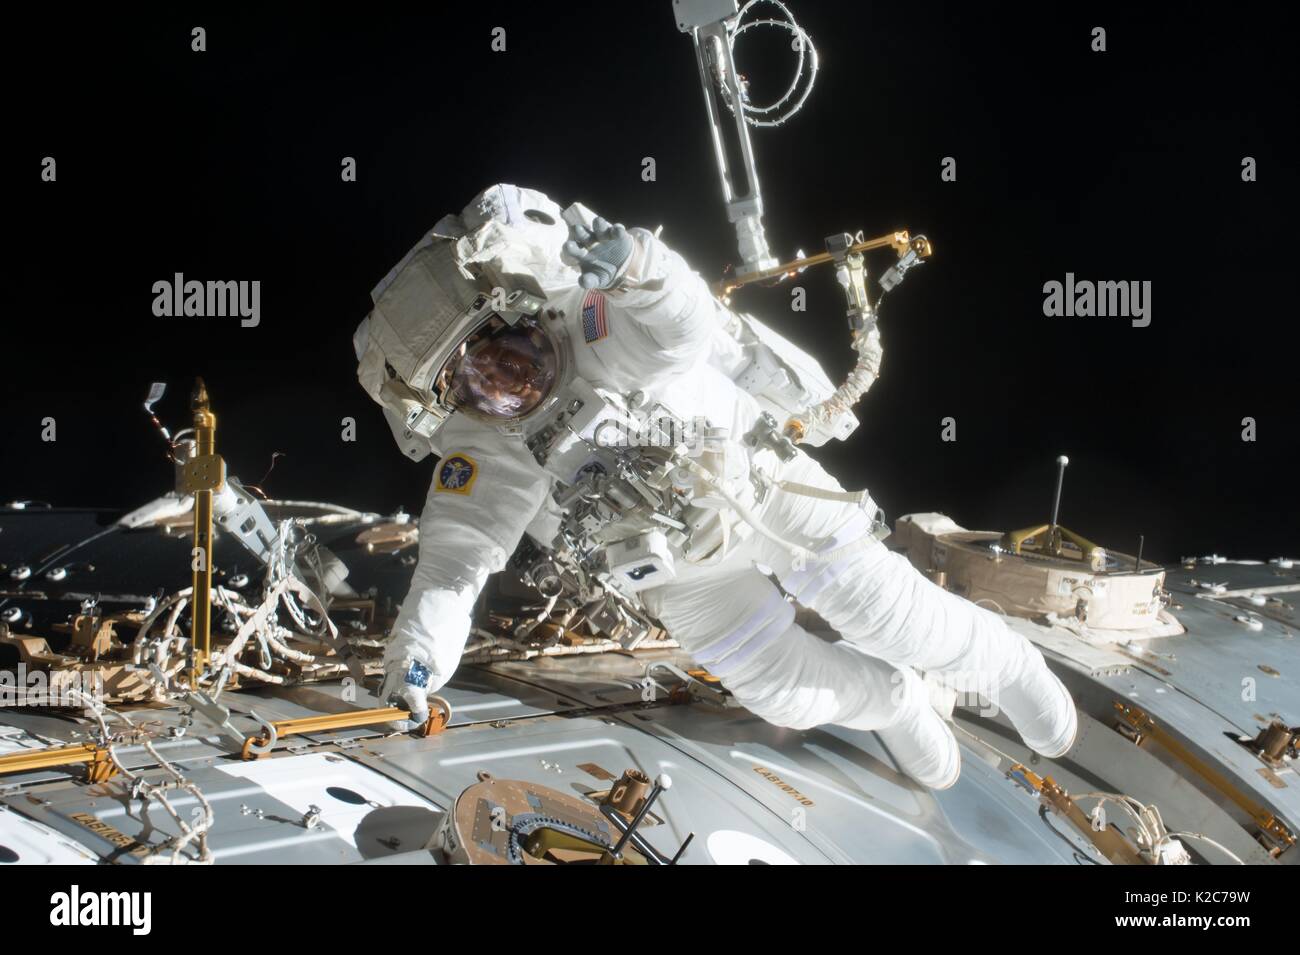 NASA International Space Station Expedition 51 prime crew member American astronaut Jack Fischer works on the outside of the ISS U.S. Destiny laboratory module during an EVA spacewalk May 23, 2017 in Earth orbit. Stock Photo